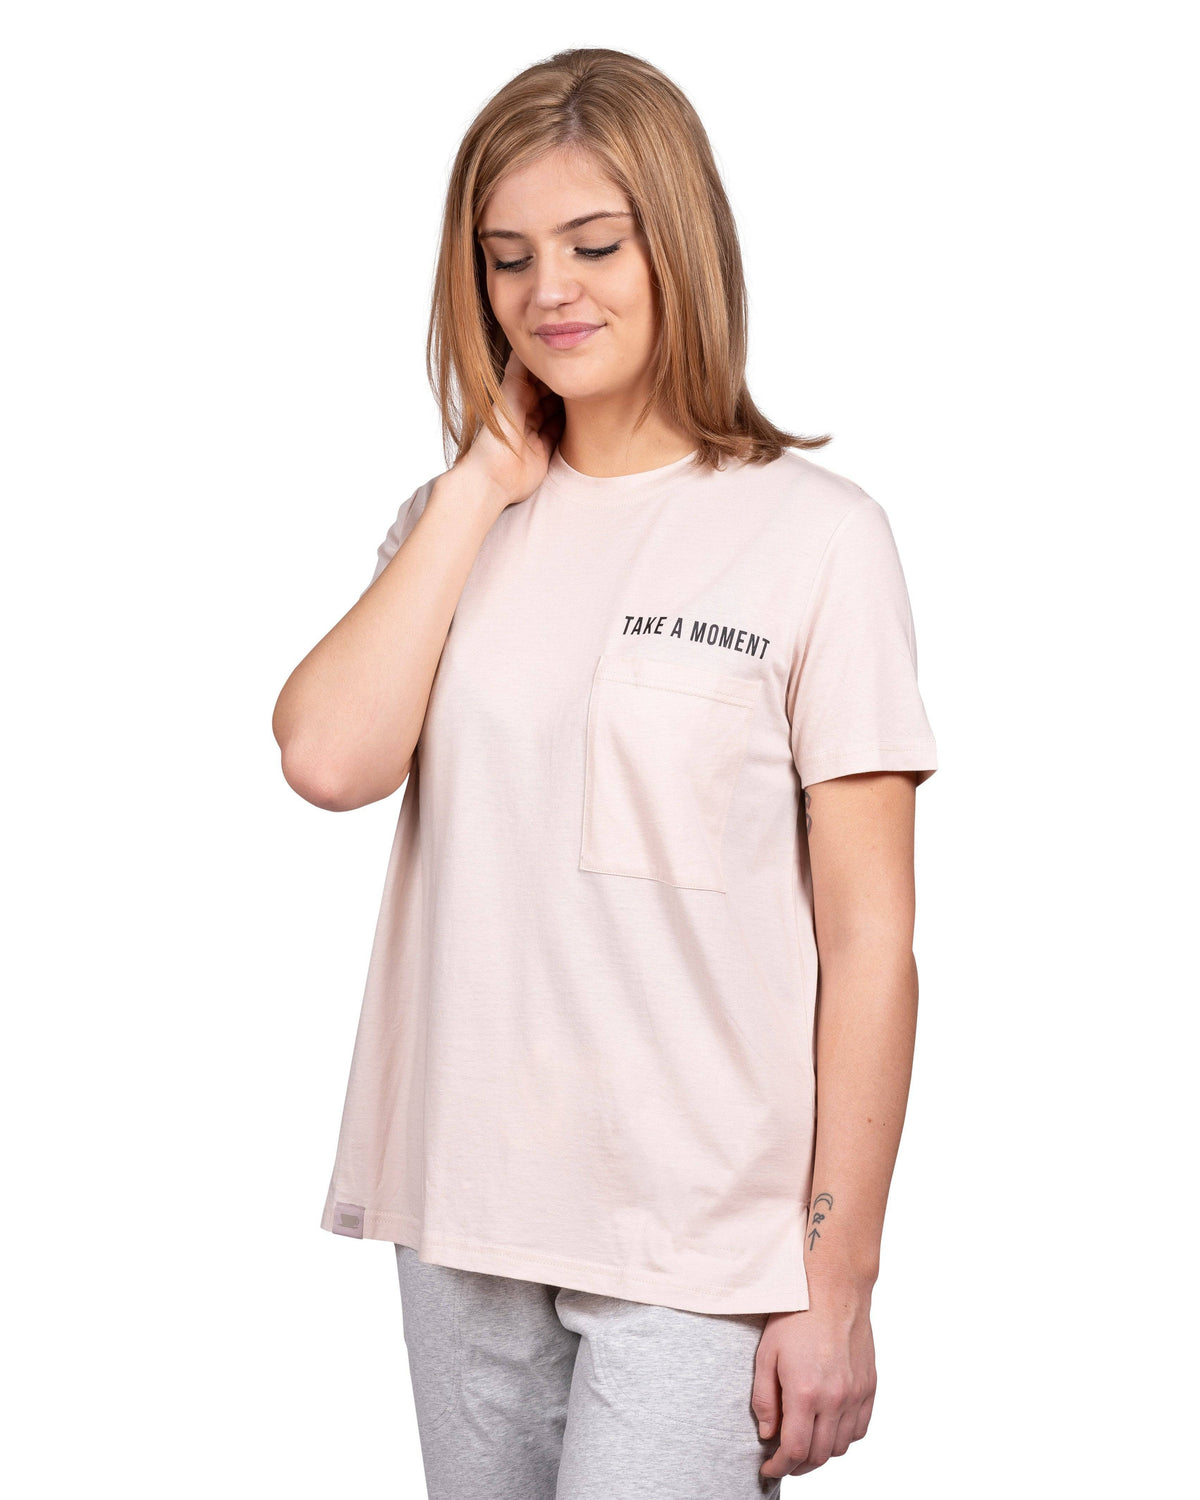 Current Mood Boyfriend T-Shirt - MORNINGS ARE FOR COFFEE AND CONTEMPLATION - LATTELOVE Co.